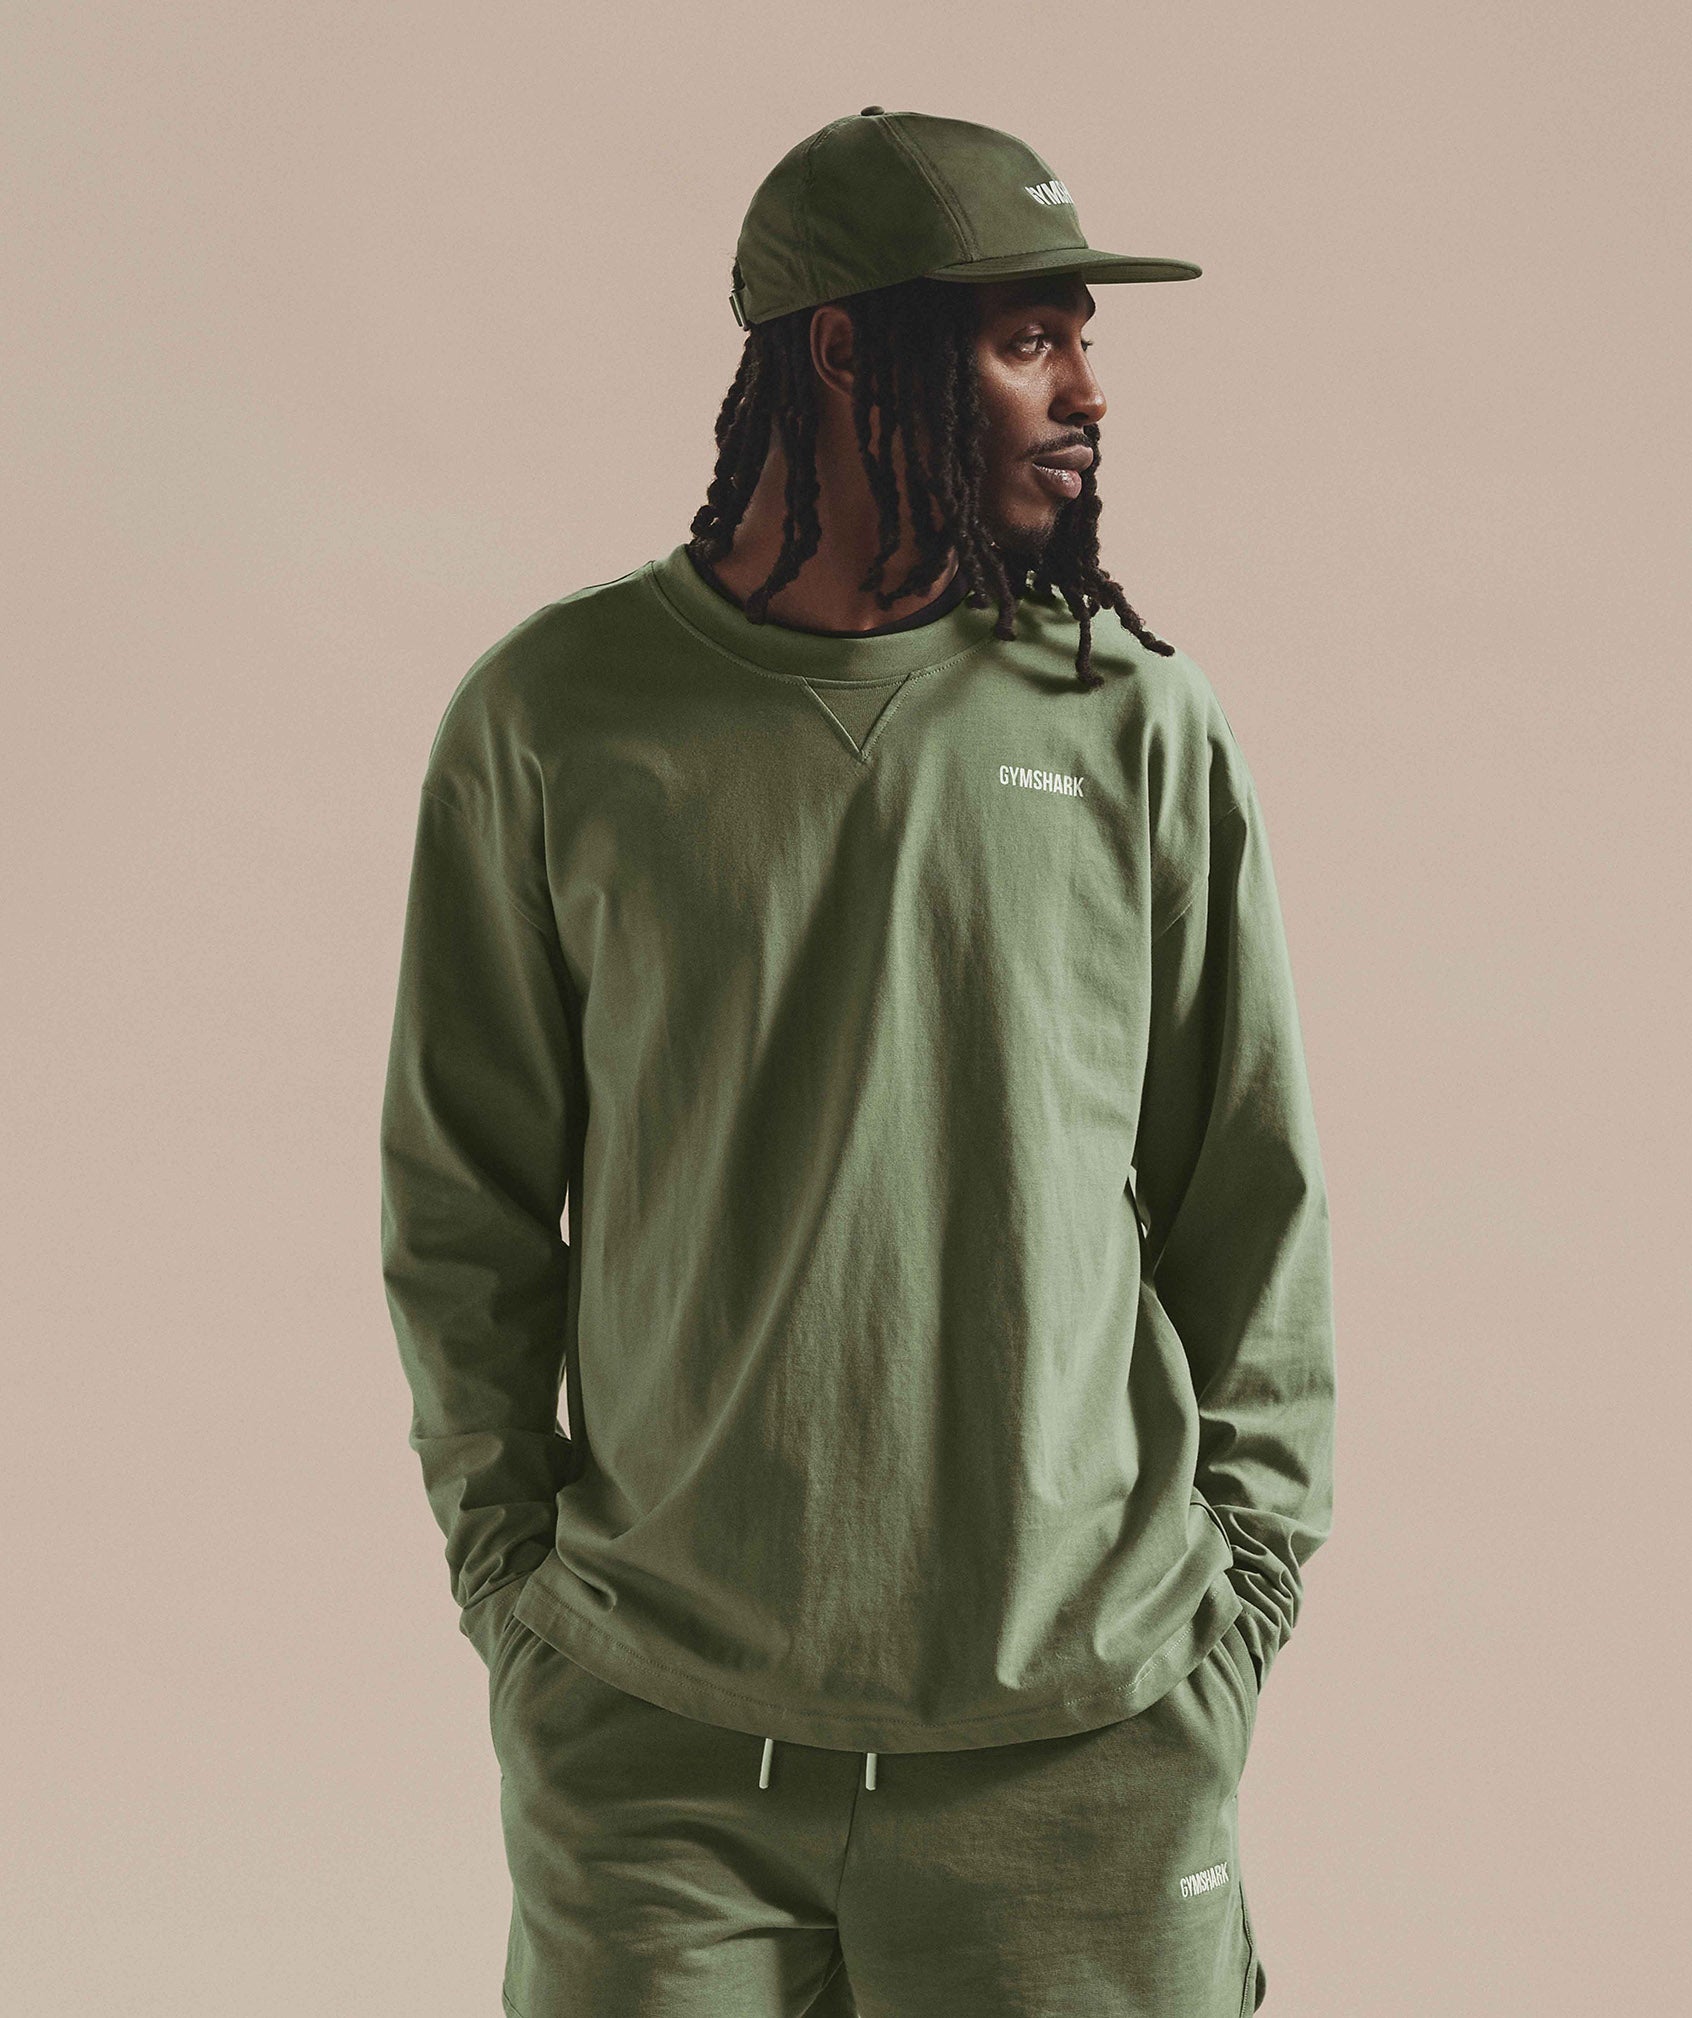 Rest Day Sweats Long Sleeve T-Shirt in Sage Green - view 1